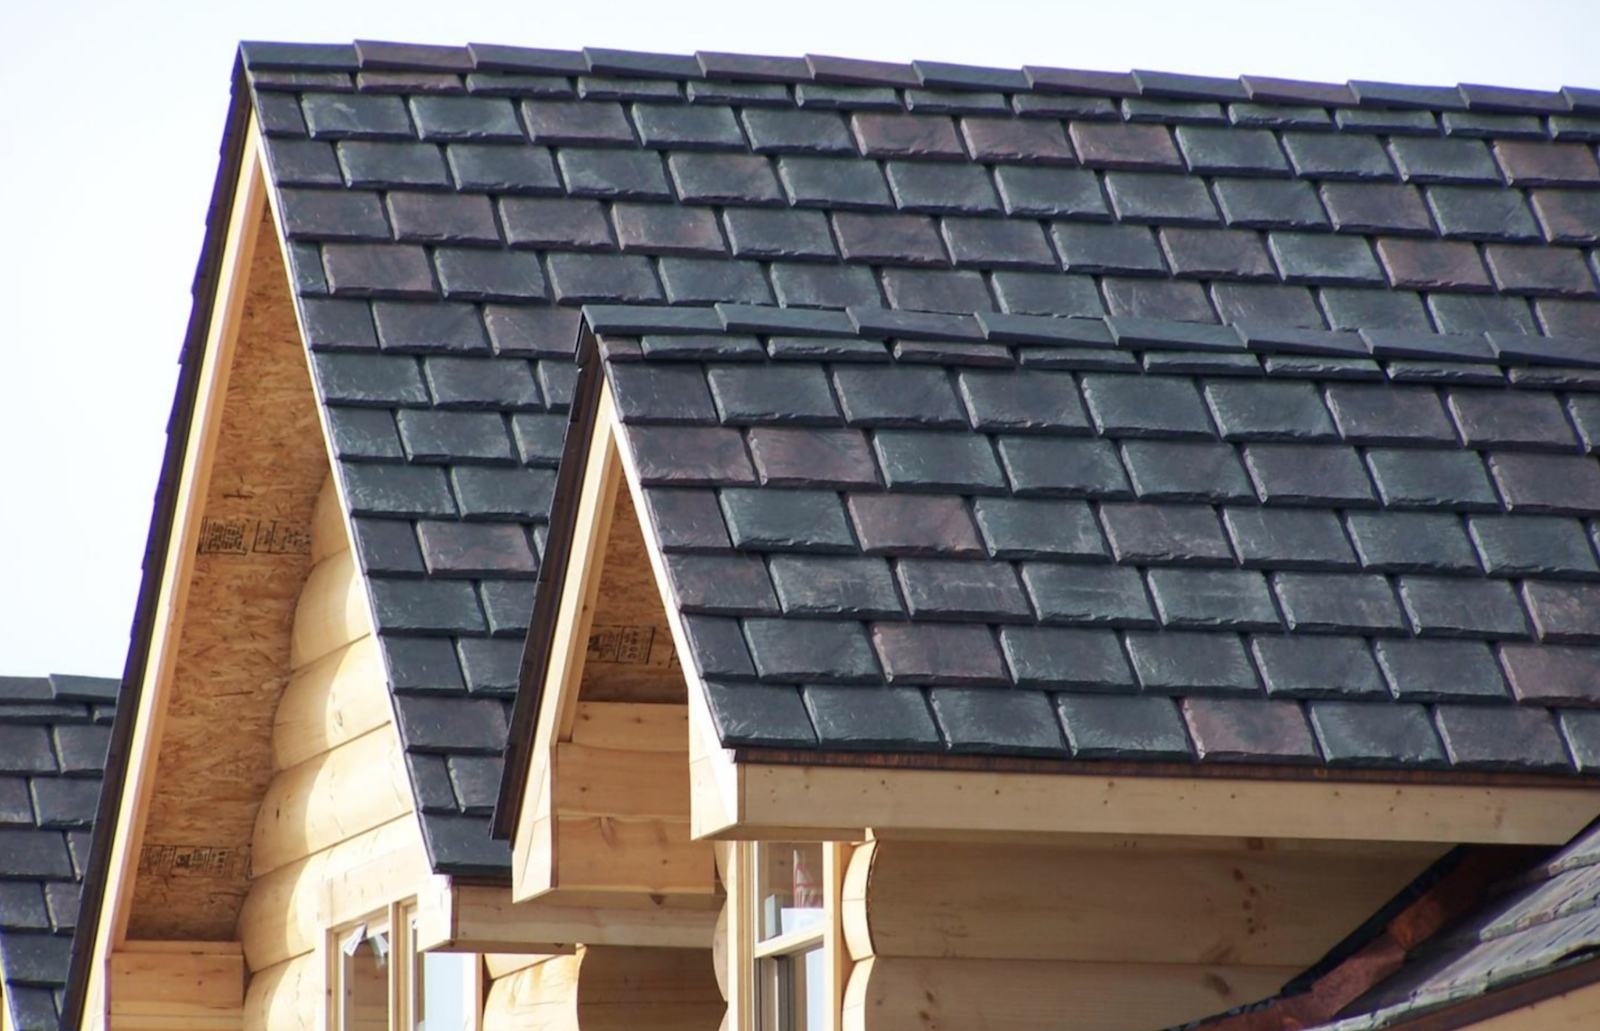 Slate Tile Roof Life Expectancy How Long Does a Slate Roof Last?